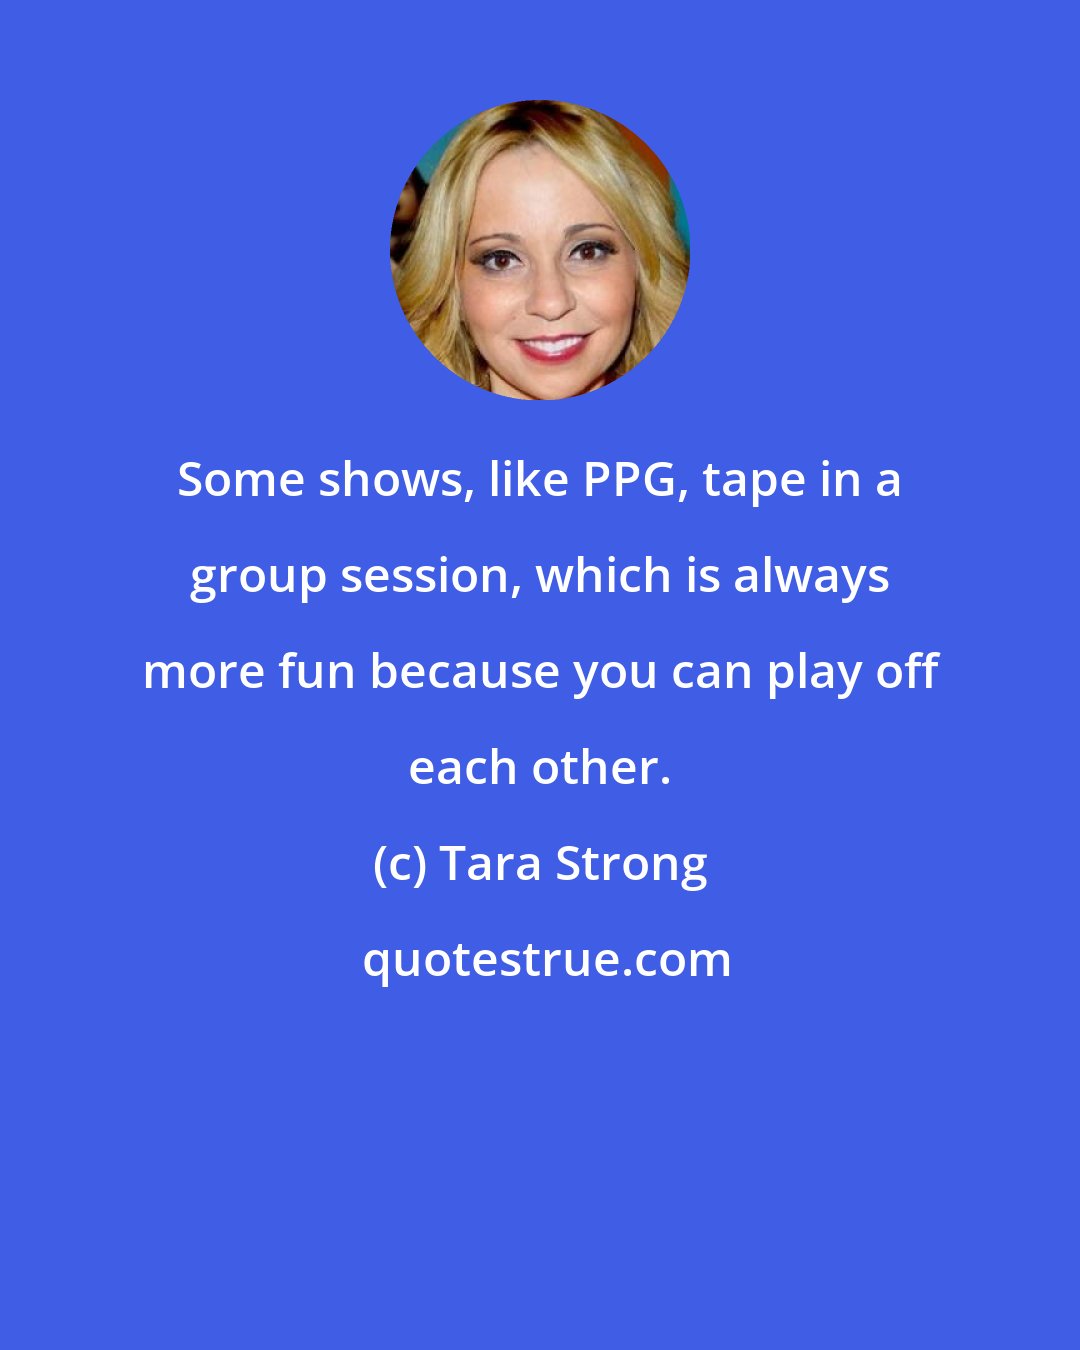 Tara Strong: Some shows, like PPG, tape in a group session, which is always more fun because you can play off each other.